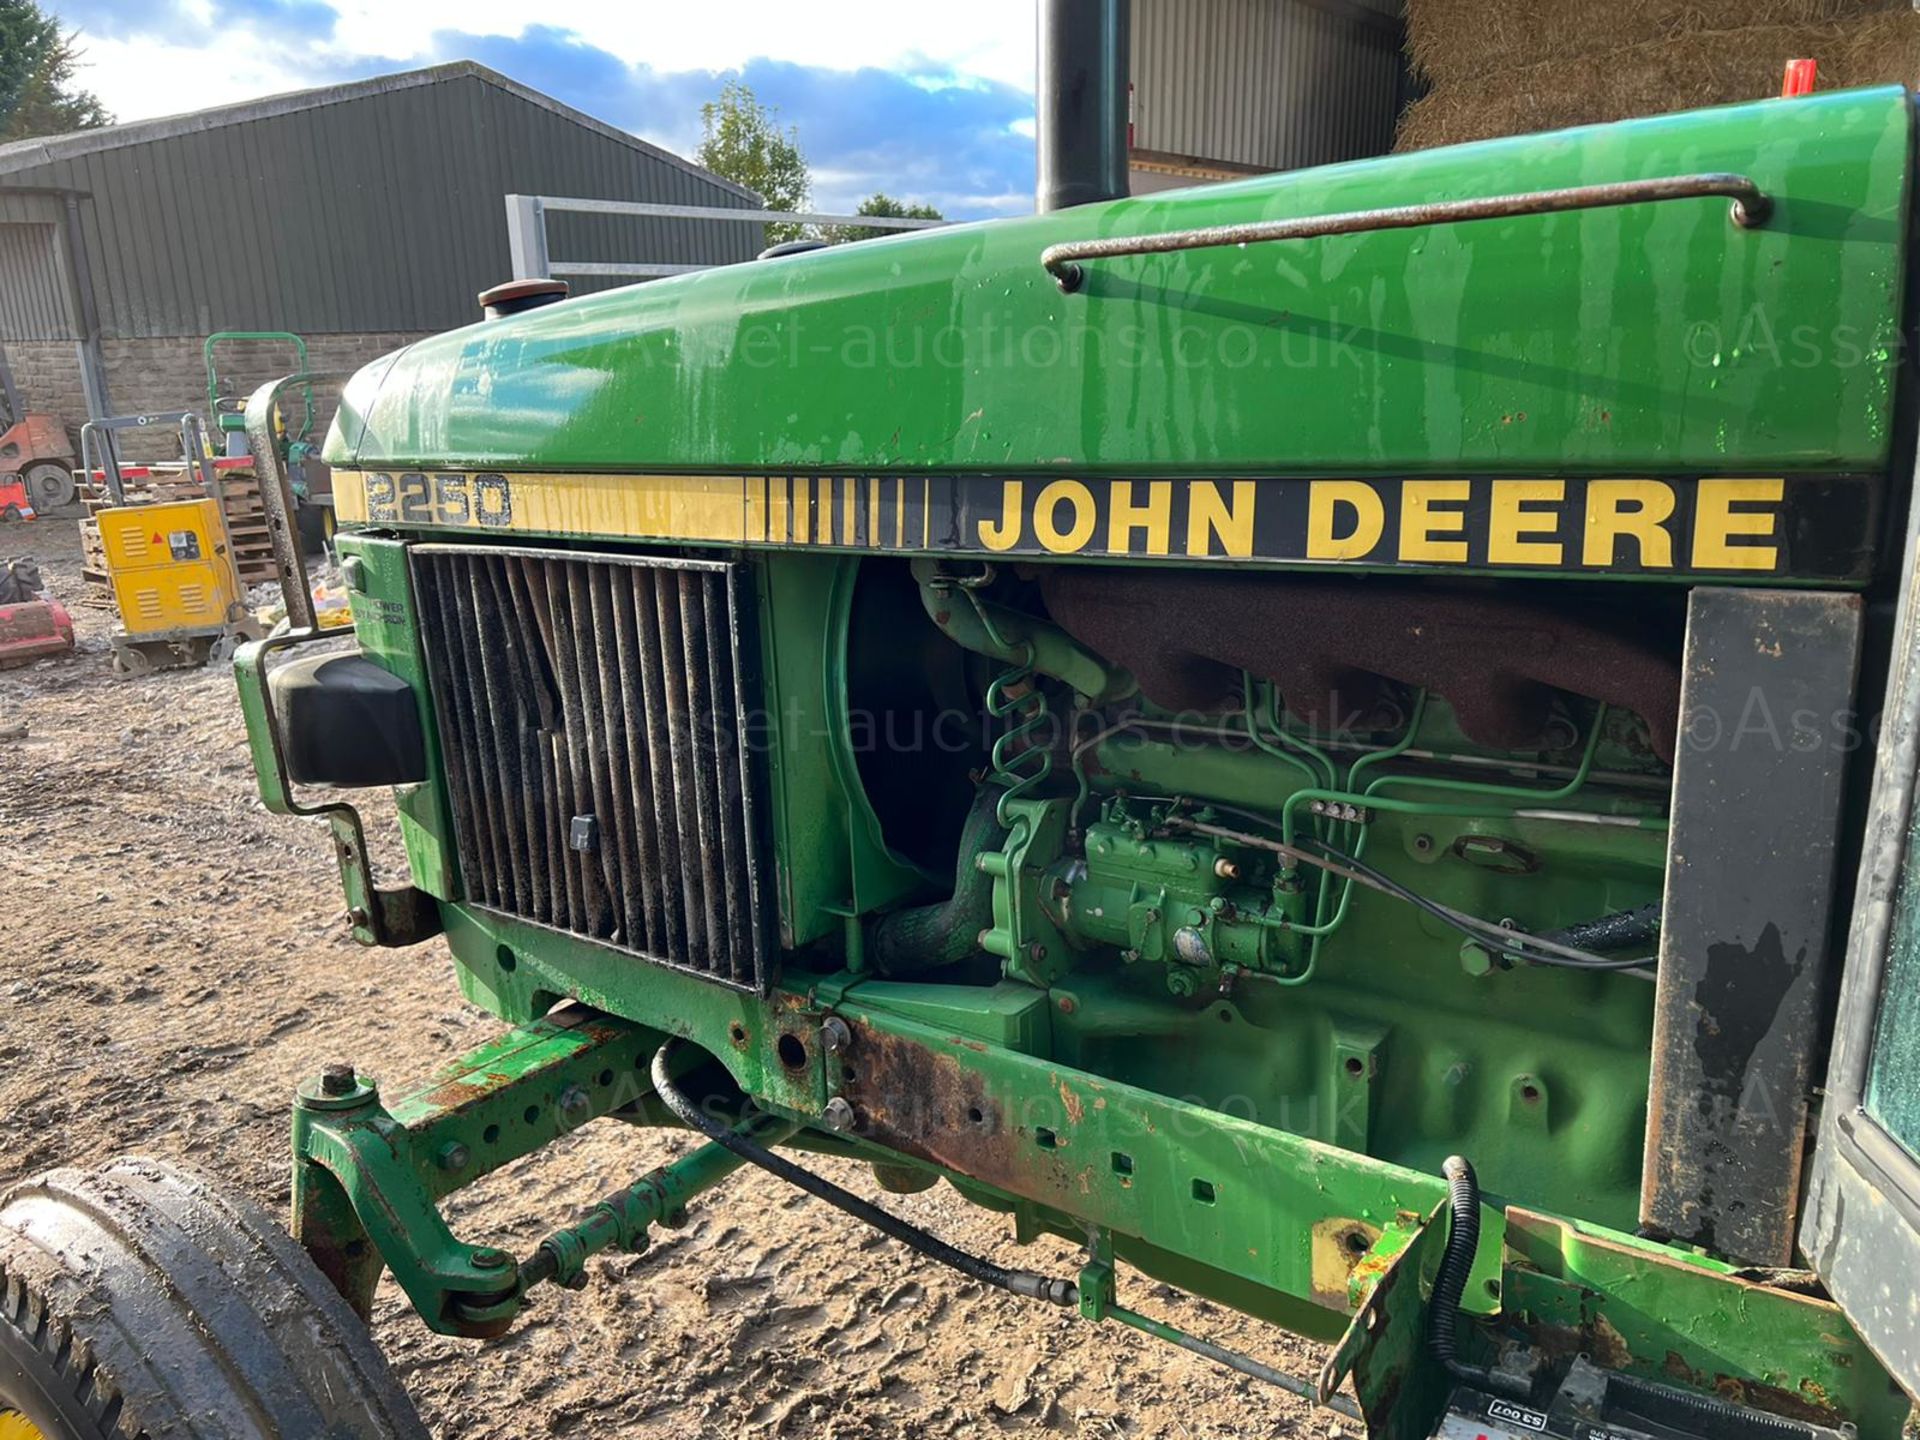 JOHN DEERE 2250 62hp TRACTOR, RUNS AND DRIVES, CABBED, 2 SPOOLS *PLUS VAT* - Image 10 of 11